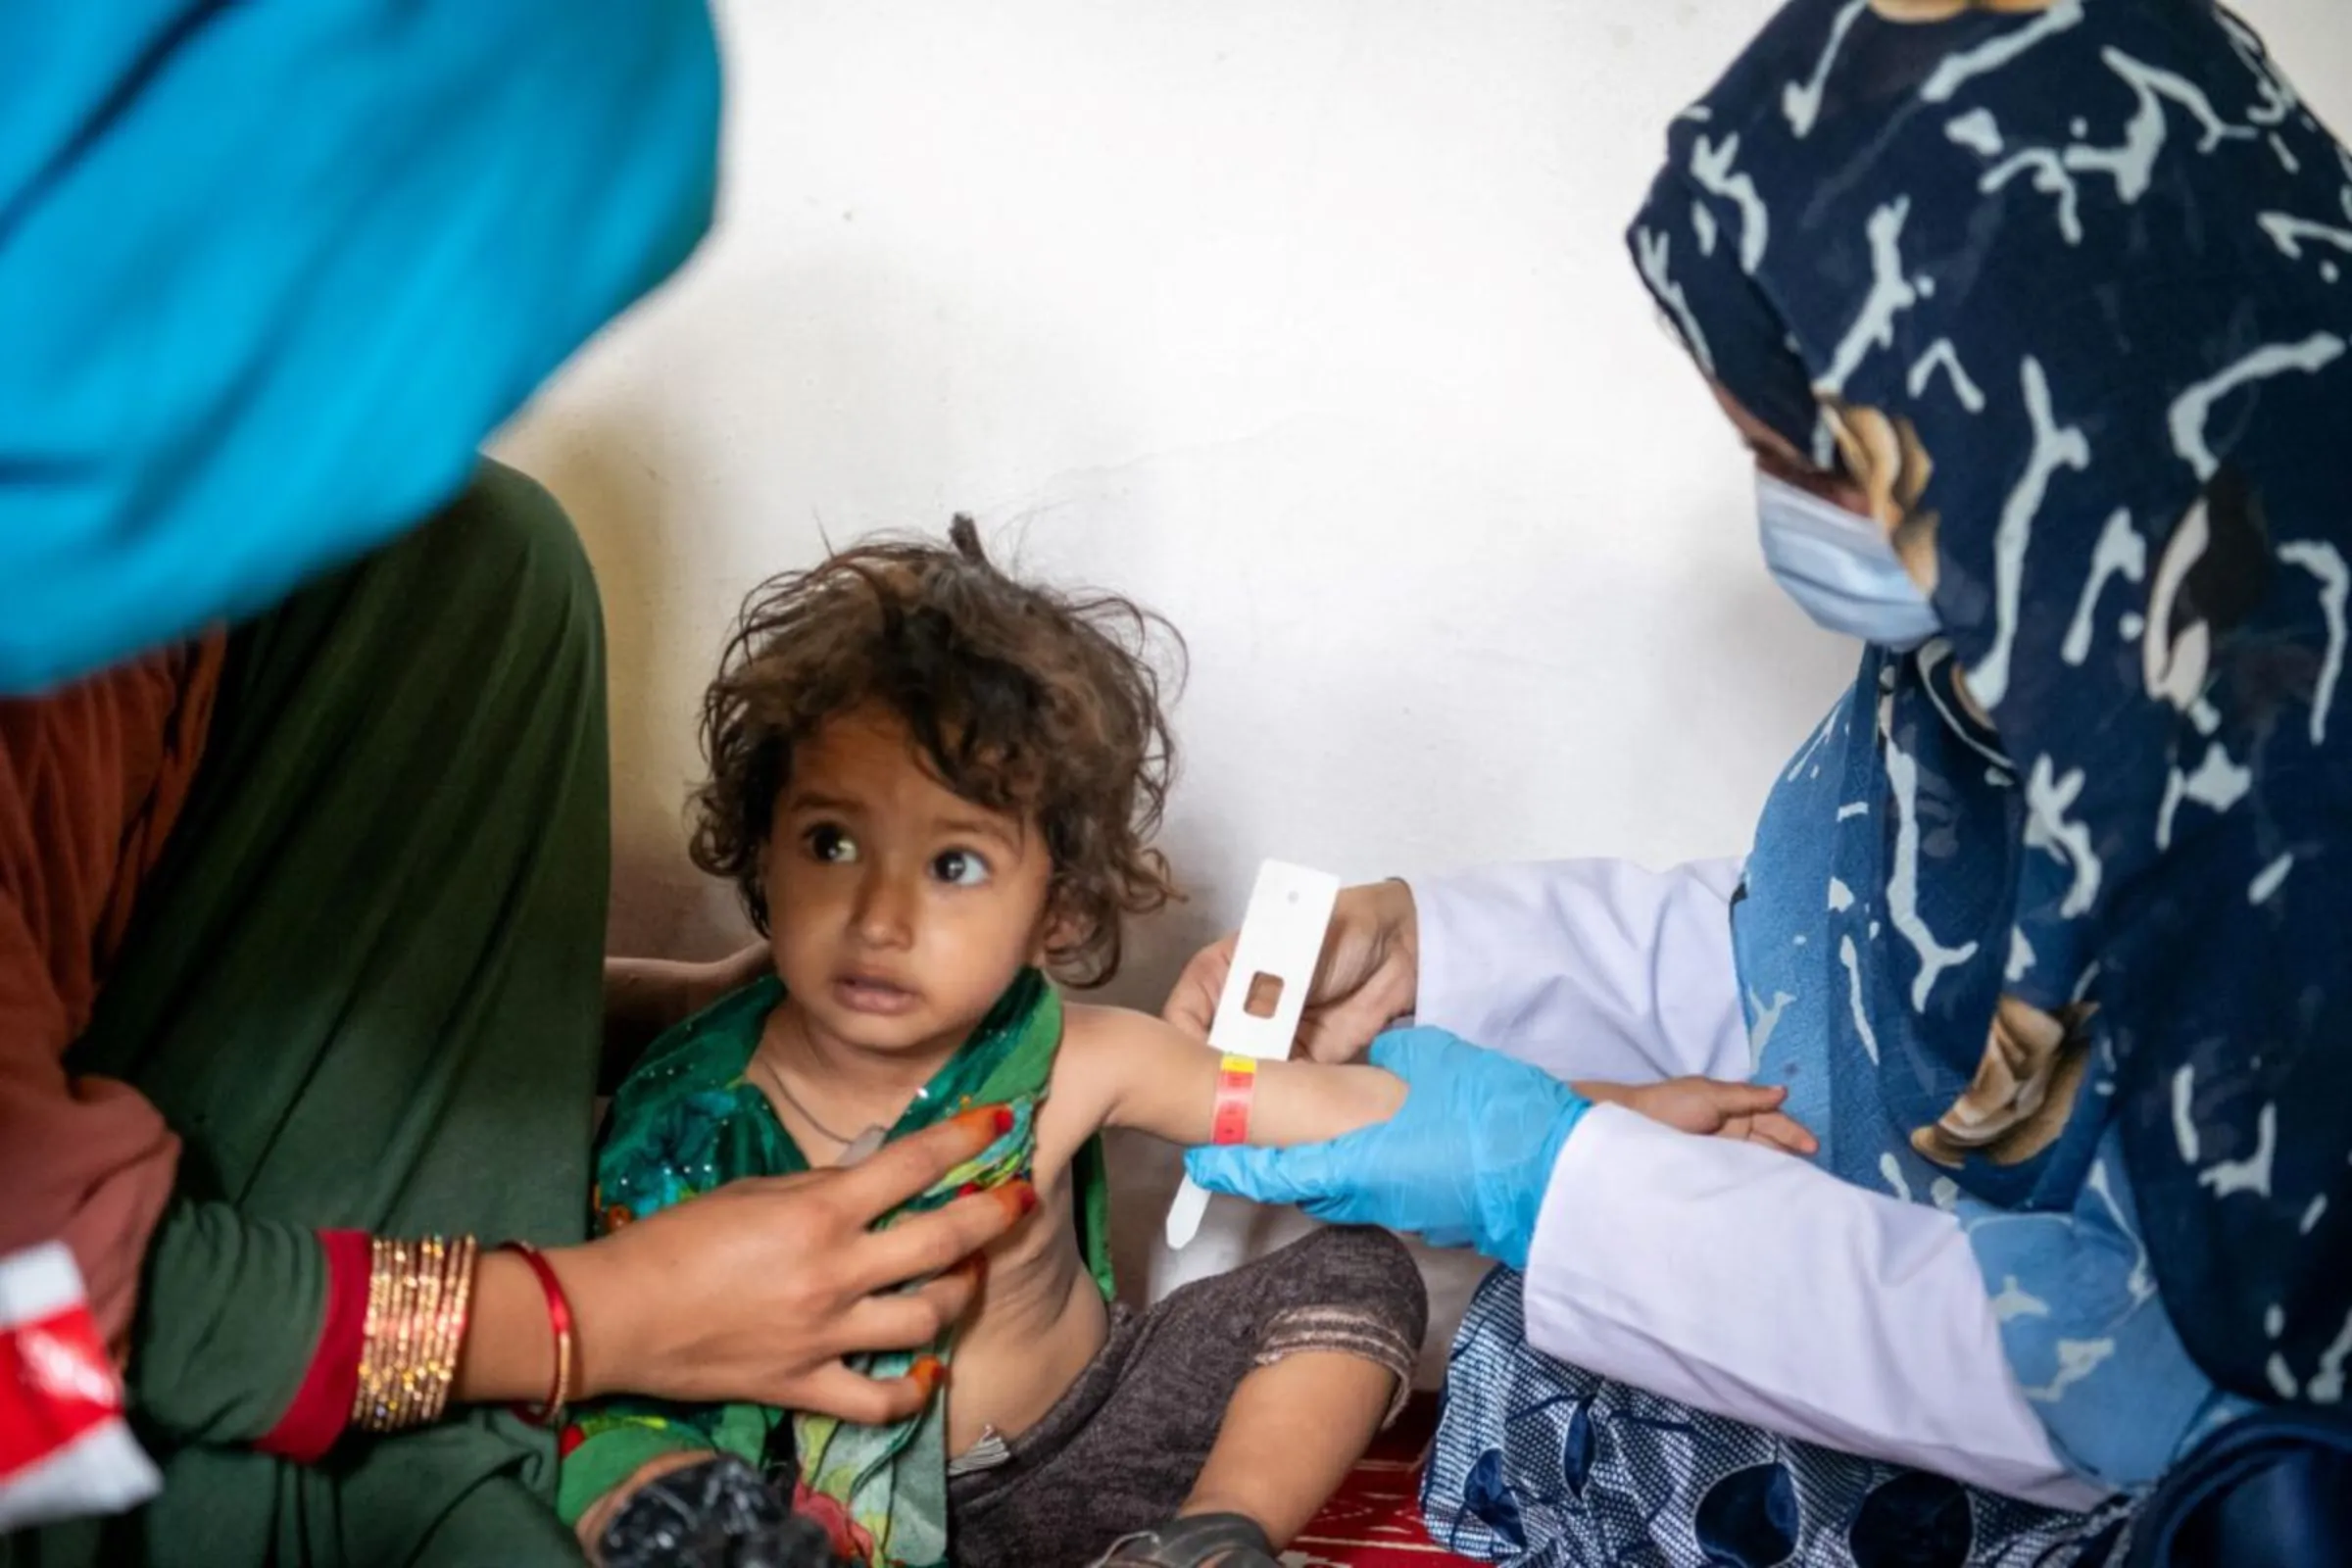 A nutrition nurse checks a child's arm circumference for signs of malnutrition at a UNICEF-supported mobile health unit in Nari District, Kunar Province, Afghanistan on 25 June 2023